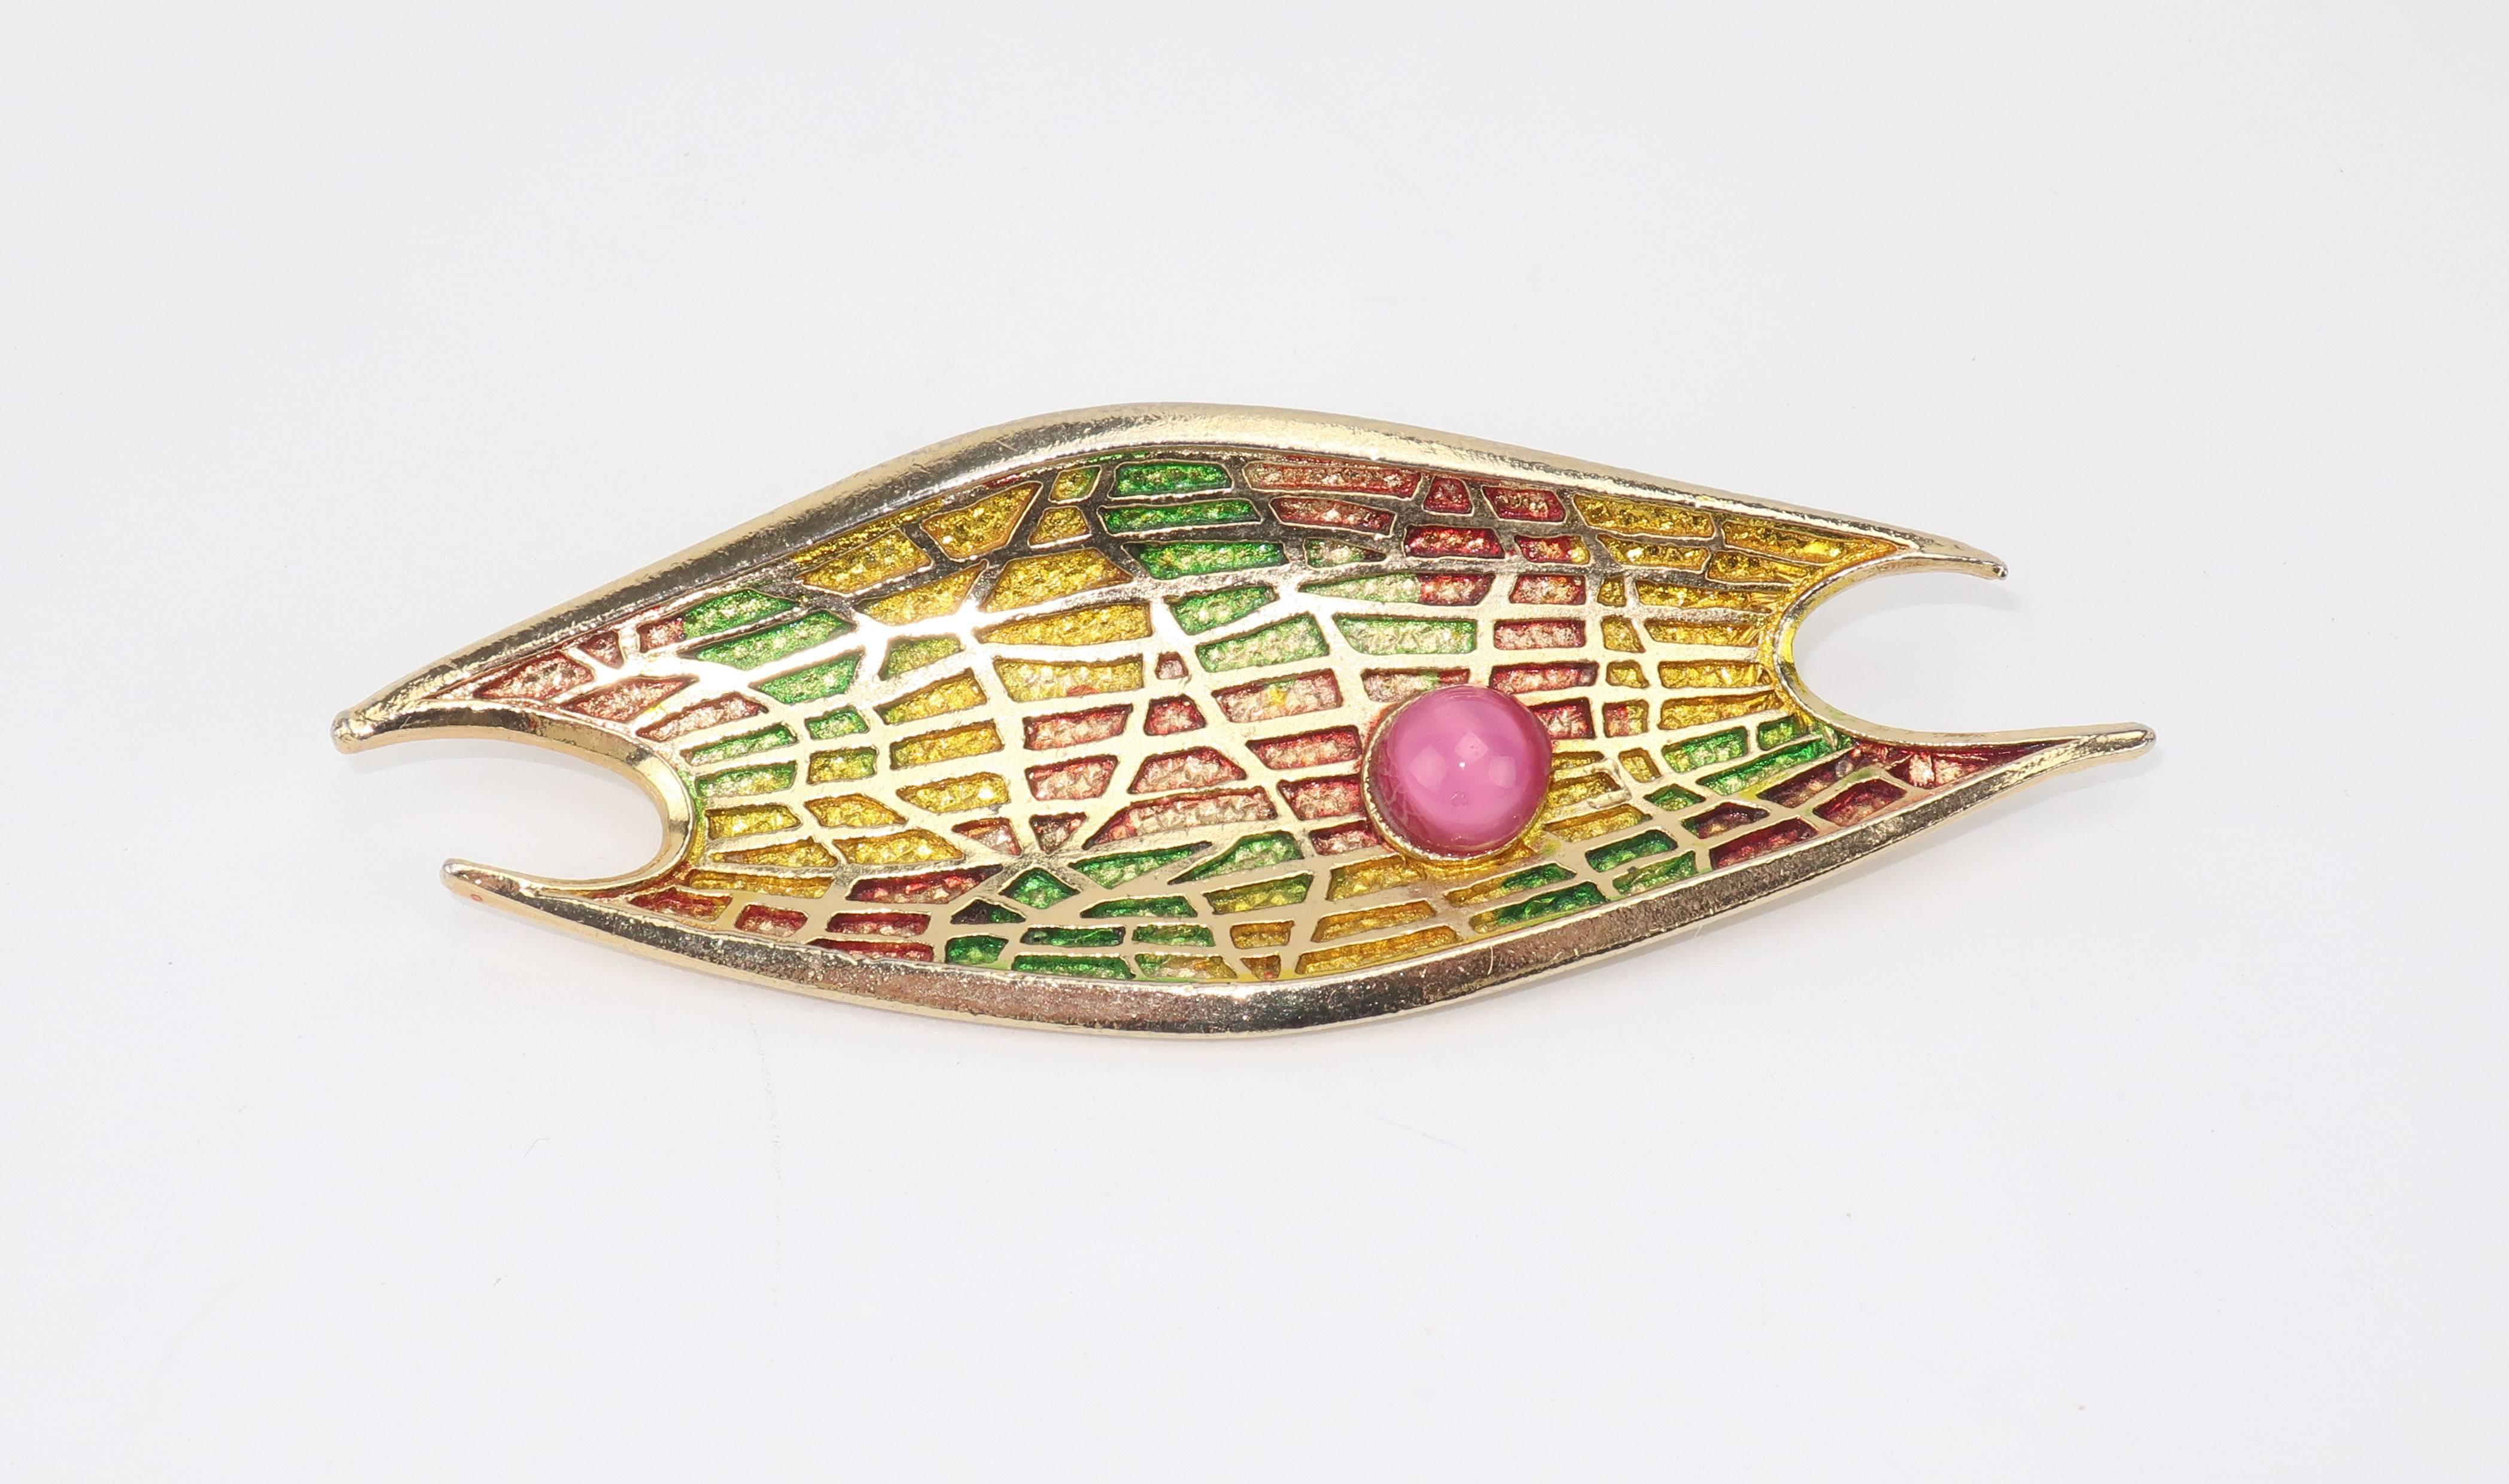 Turn heads with this abstract modernist gold tone brooch.  The unusual shape of the brooch is enhanced by the texture of the design with a colorful surface resembling an acid etch effect layered with a spider web style grid.  The concave surface is